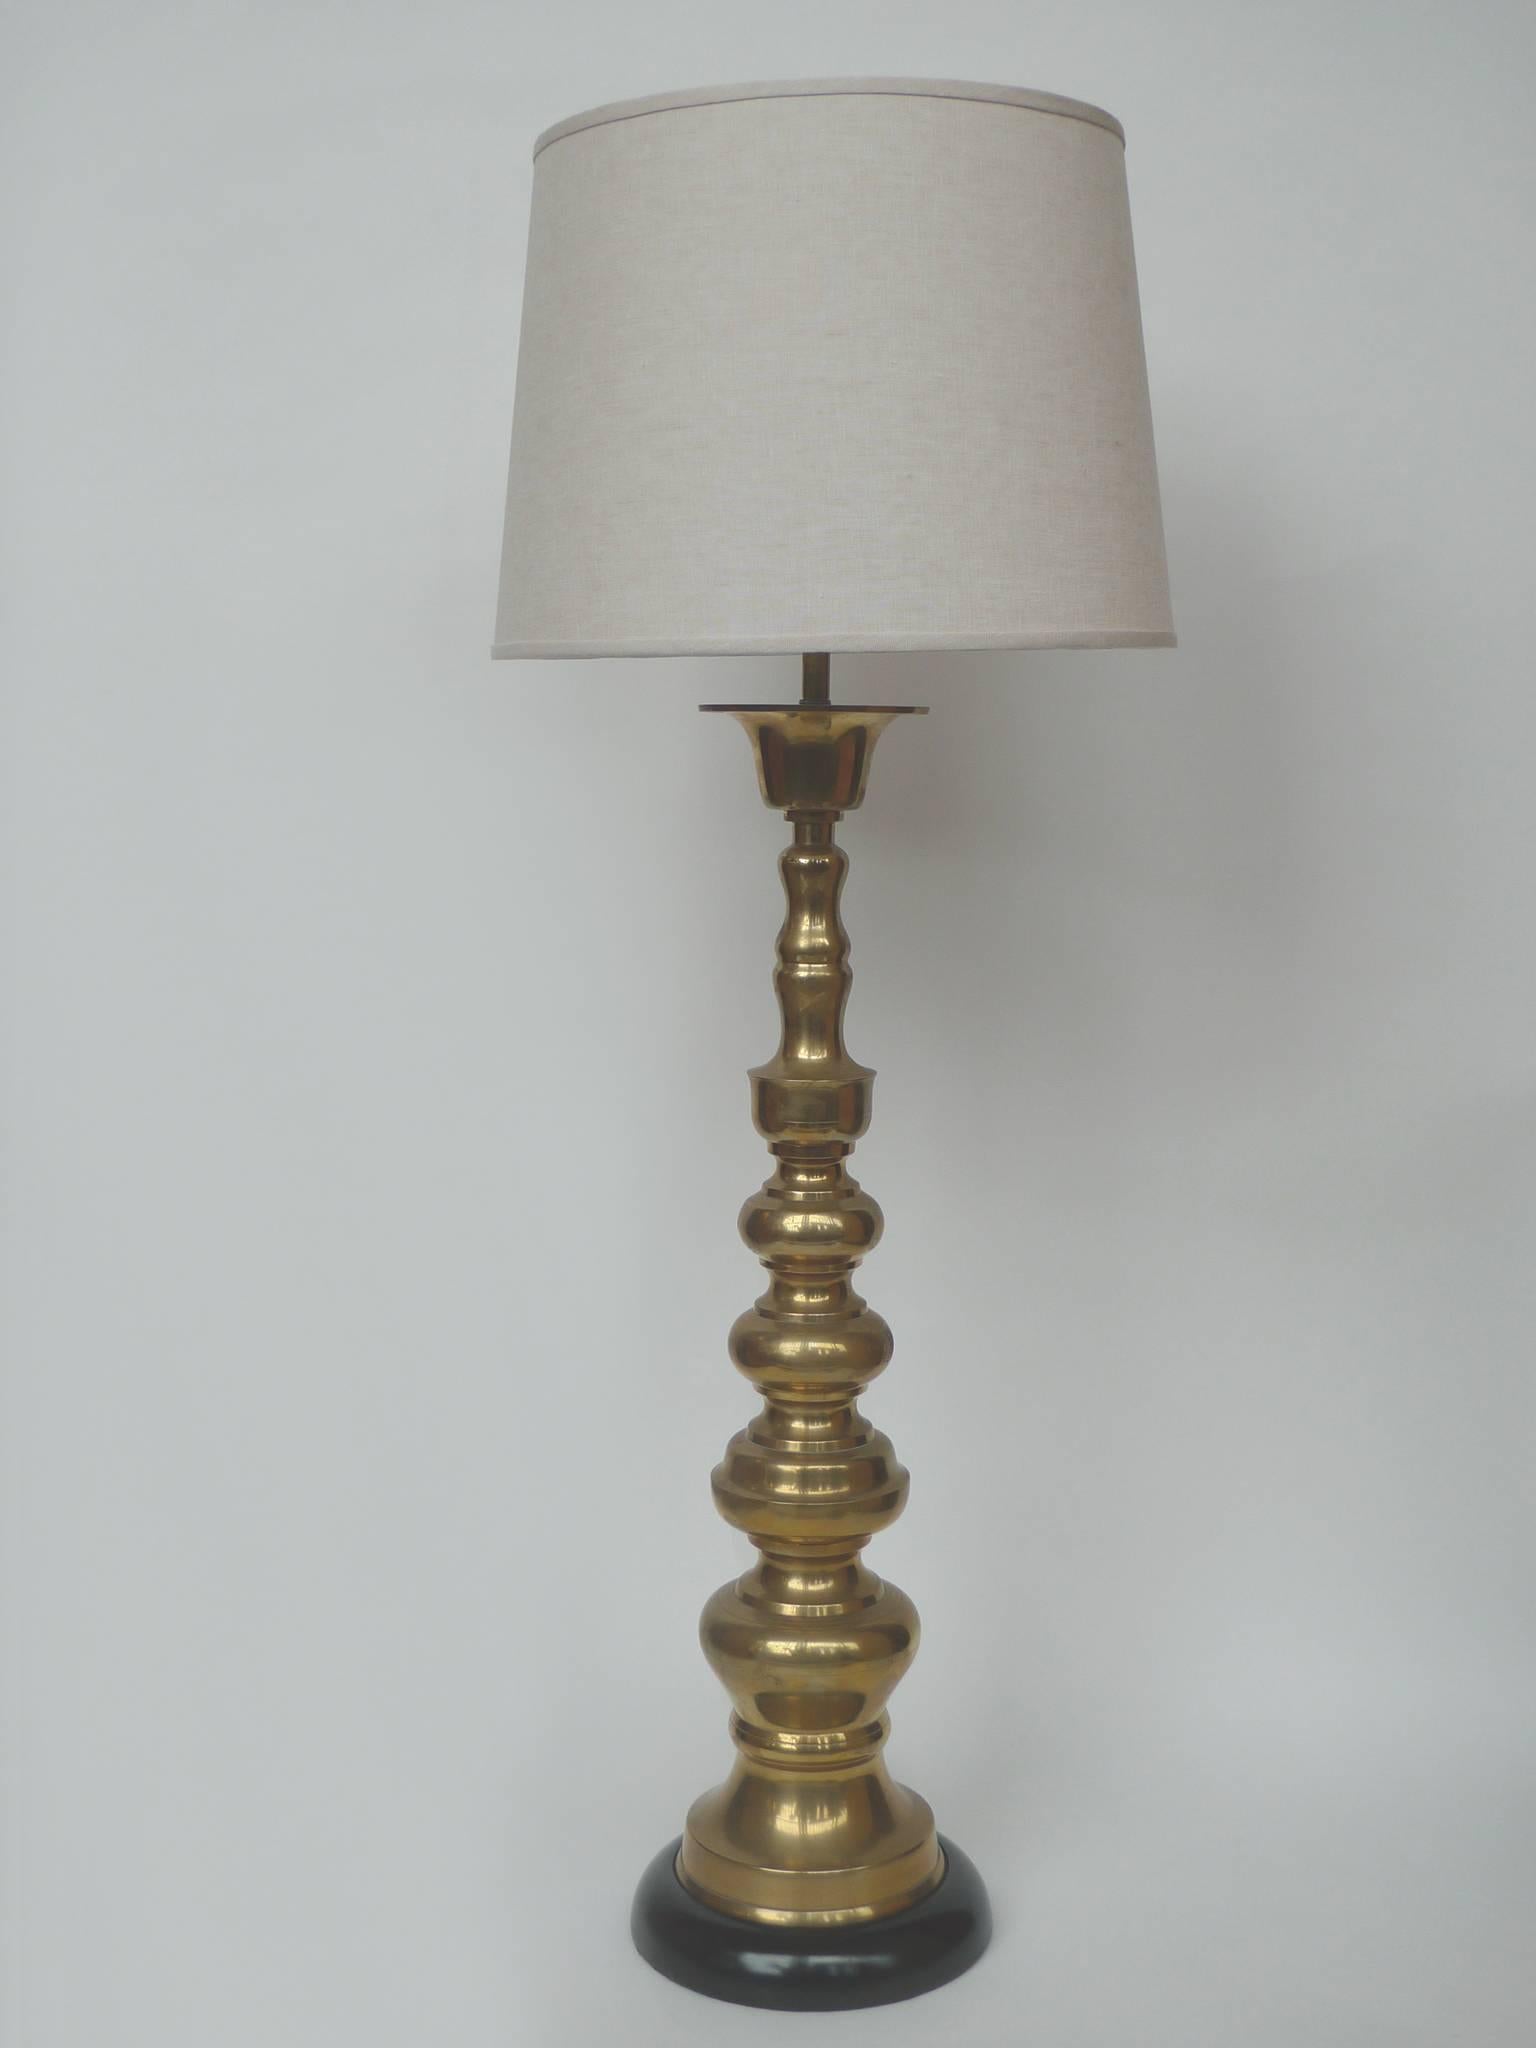 These table lamps by Stiffel beautifully illuminate. They are striking for their height and baluster forms in polished brass. The lamps are newly rewired with new brass hardware and new silk shades. The bases are round wood painted in glossy black.